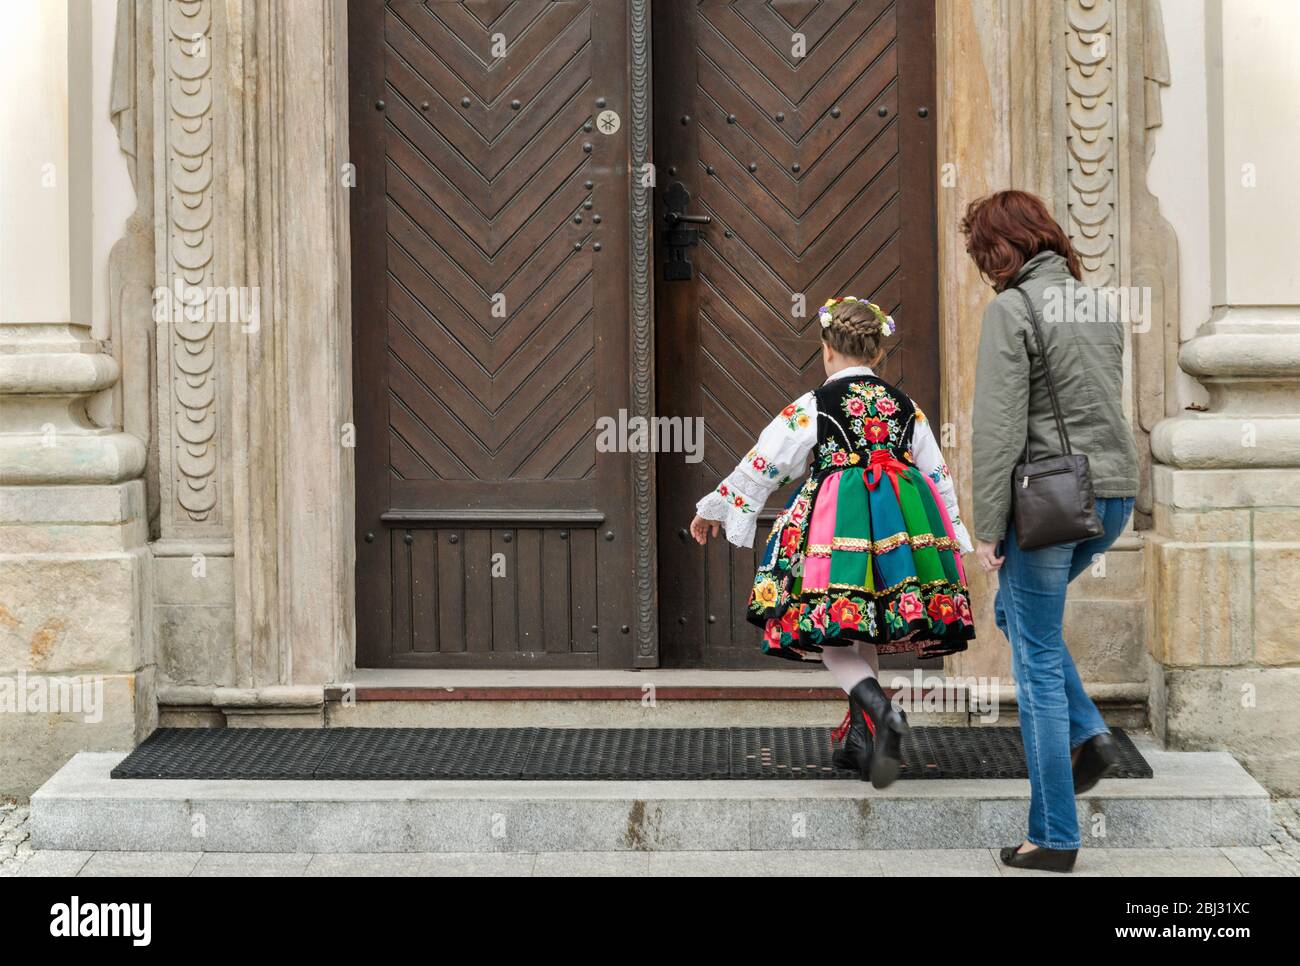 Girl wearing folk costume, mother, entering church for First Holy Communion event, Cathedral Basilica in Lowicz, Mazovia, Poland Stock Photo